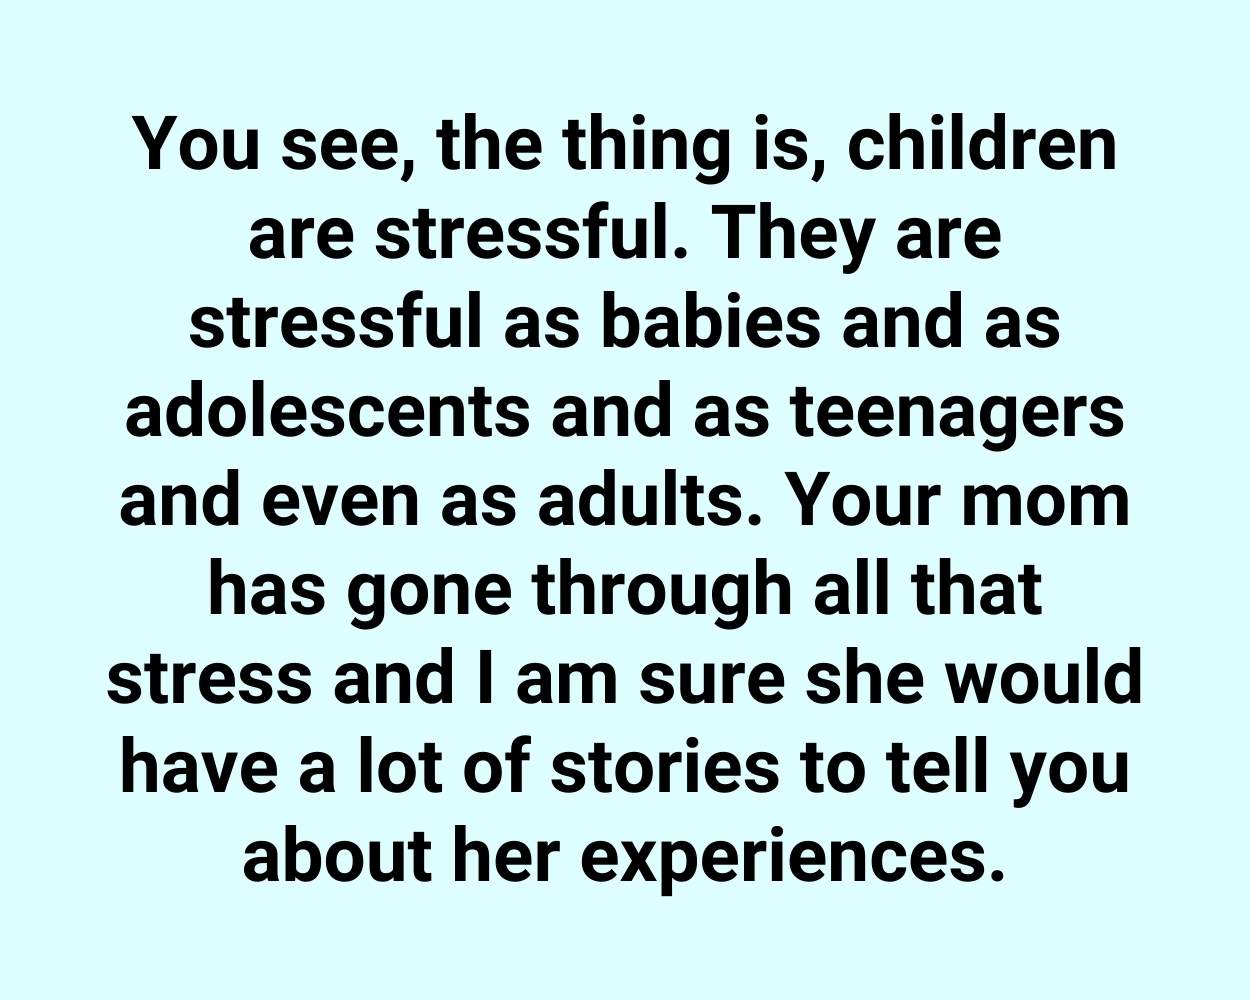 You see, the thing is, children are stressful